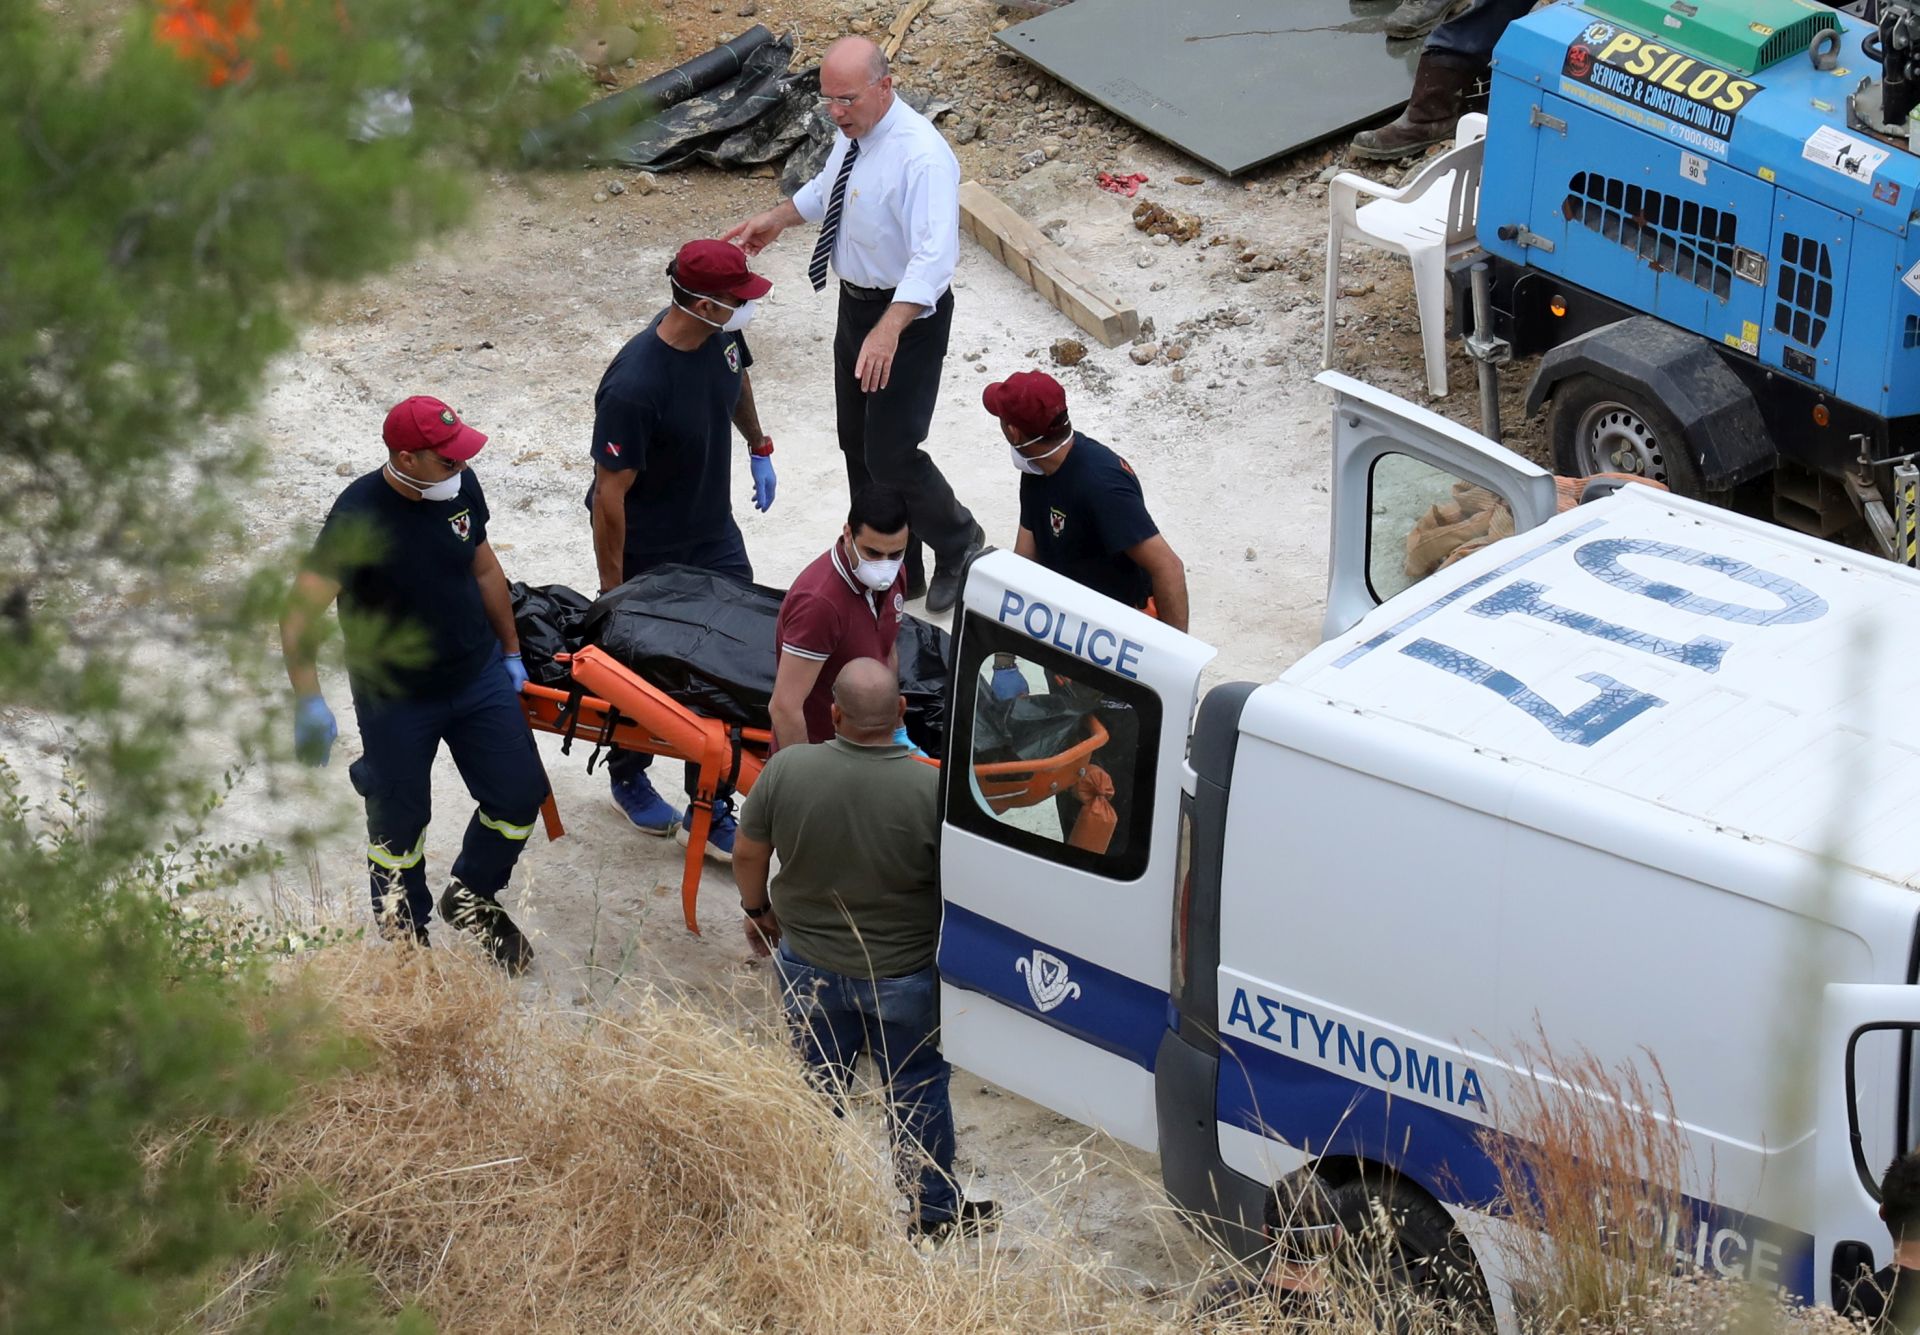 epa07624305 Investigators search for the body of Maricar Valtinez in the Red Lake in Mitsero village, Cyprus, 04 June 2019. Police are searching the lake since 53 days for the remains of the victims of a 35-year-old apparent serial killer who is leading police to his victims' remains.  EPA/KATIA CHRISTODOULOU